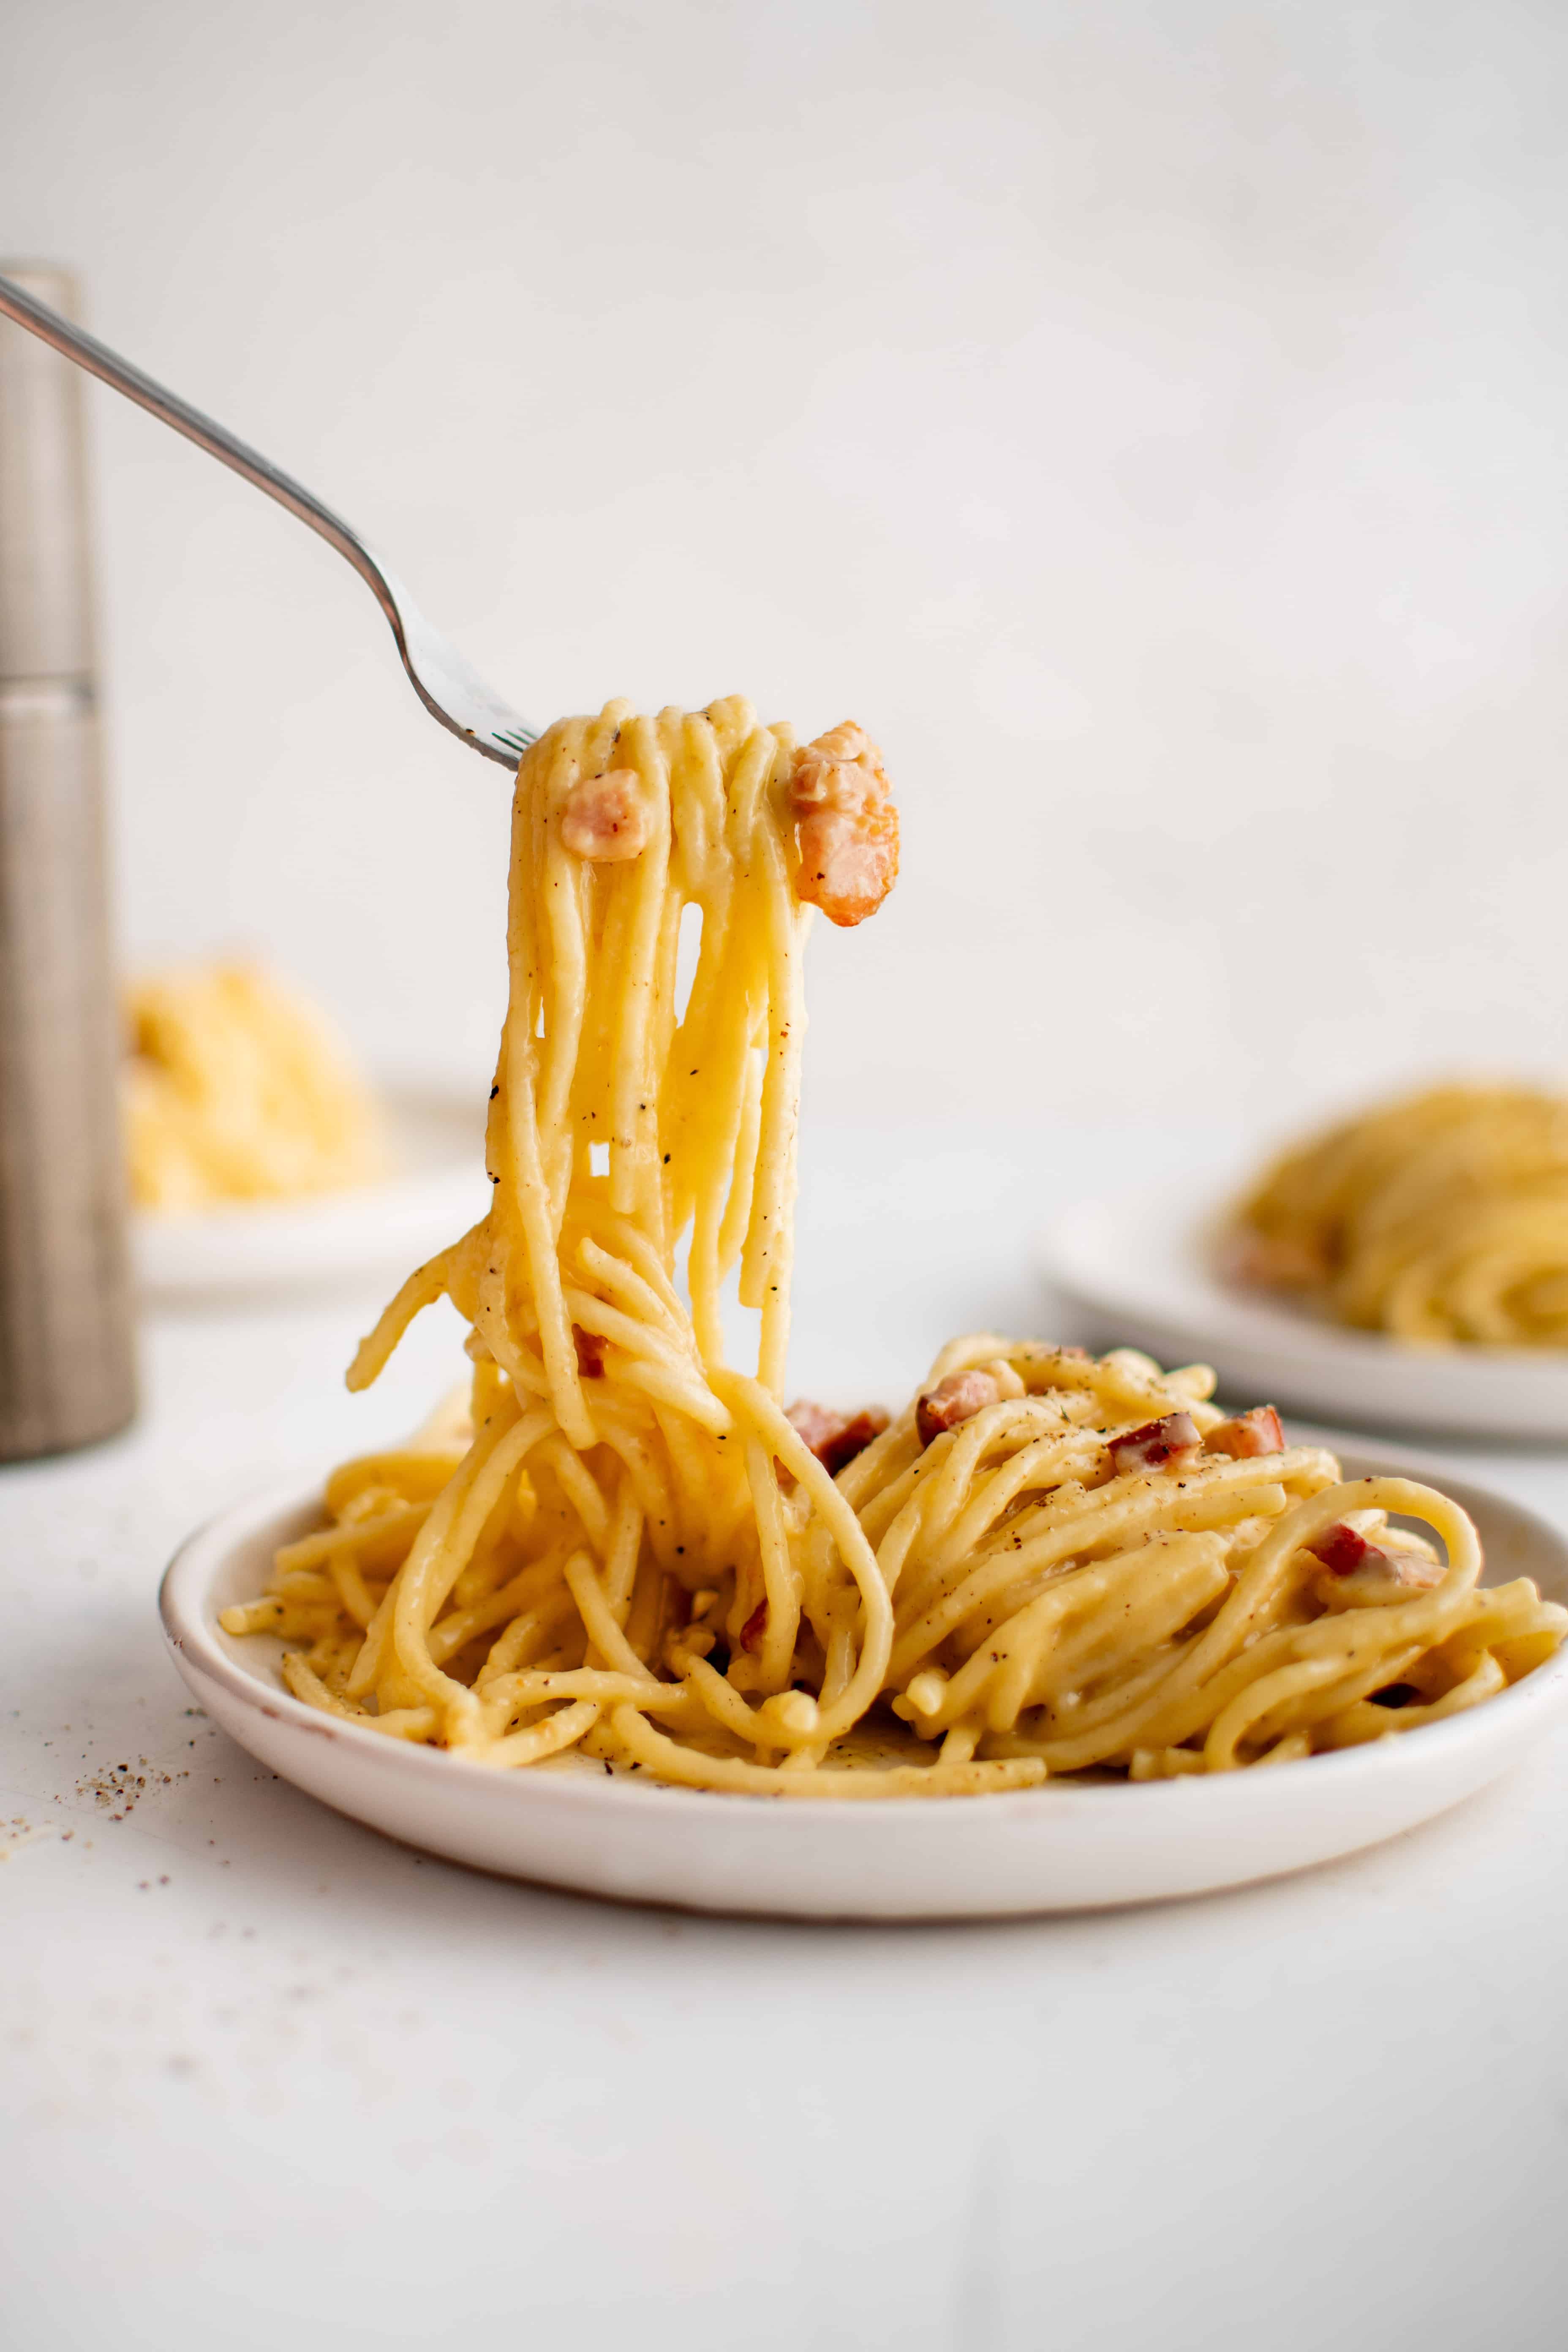 Fork filled with long strands of cooked spaghetti carbonara hovering over a plate filled with cooked pasta.